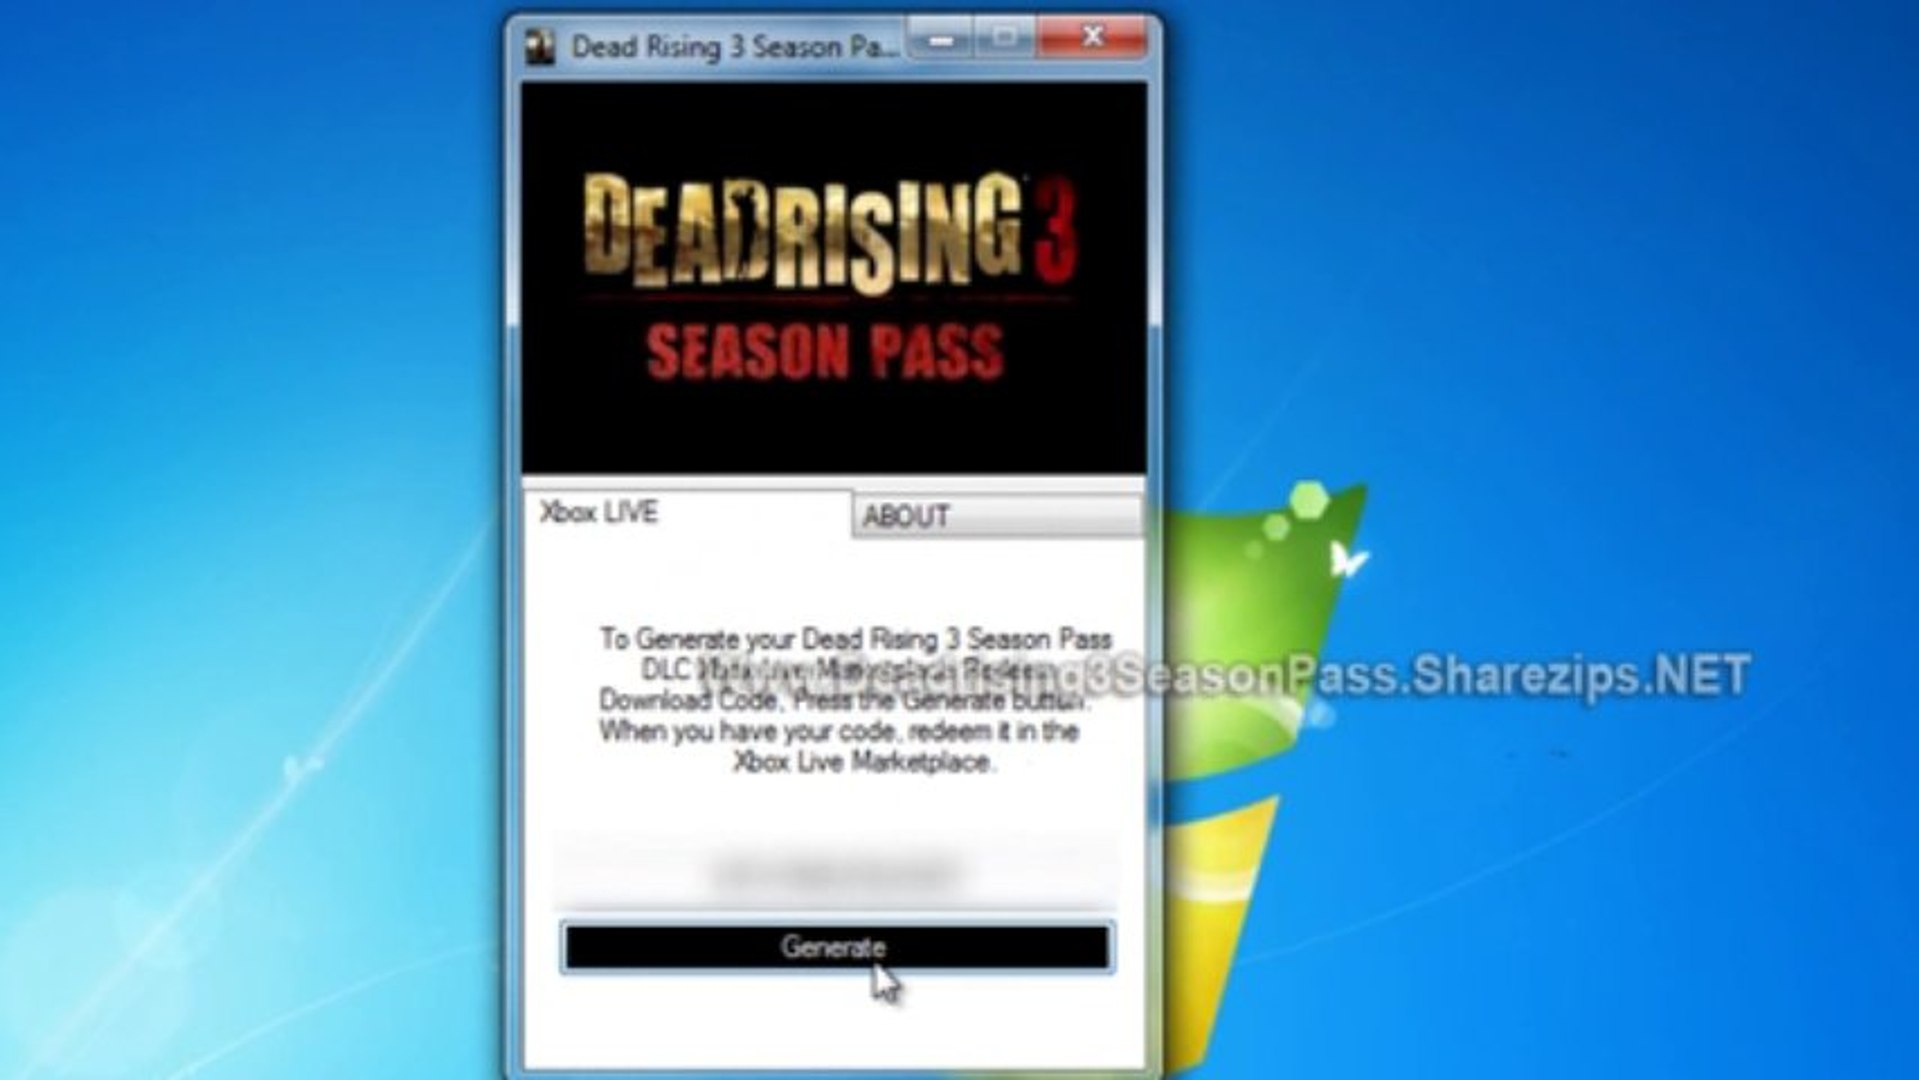 Leaked Dead Rising 3 Season Pass Code - FREE Download - video Dailymotion